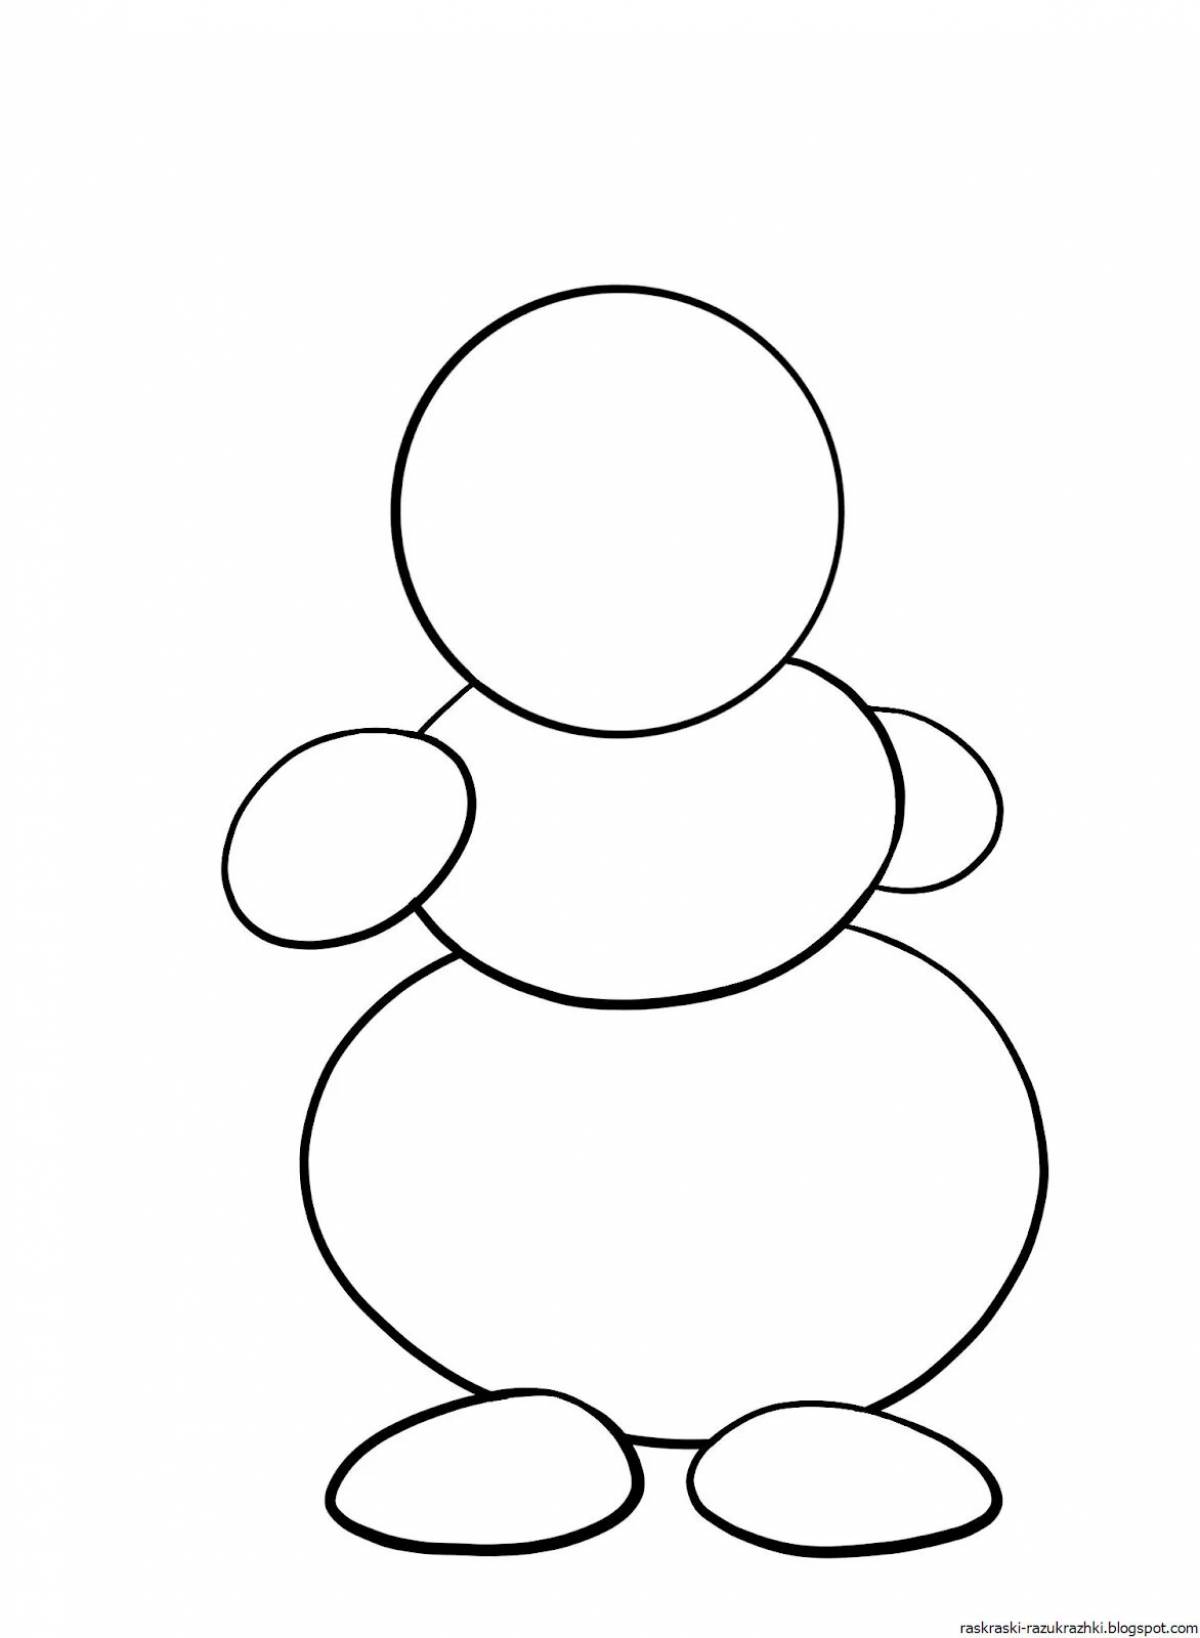 Snowman without nose #7